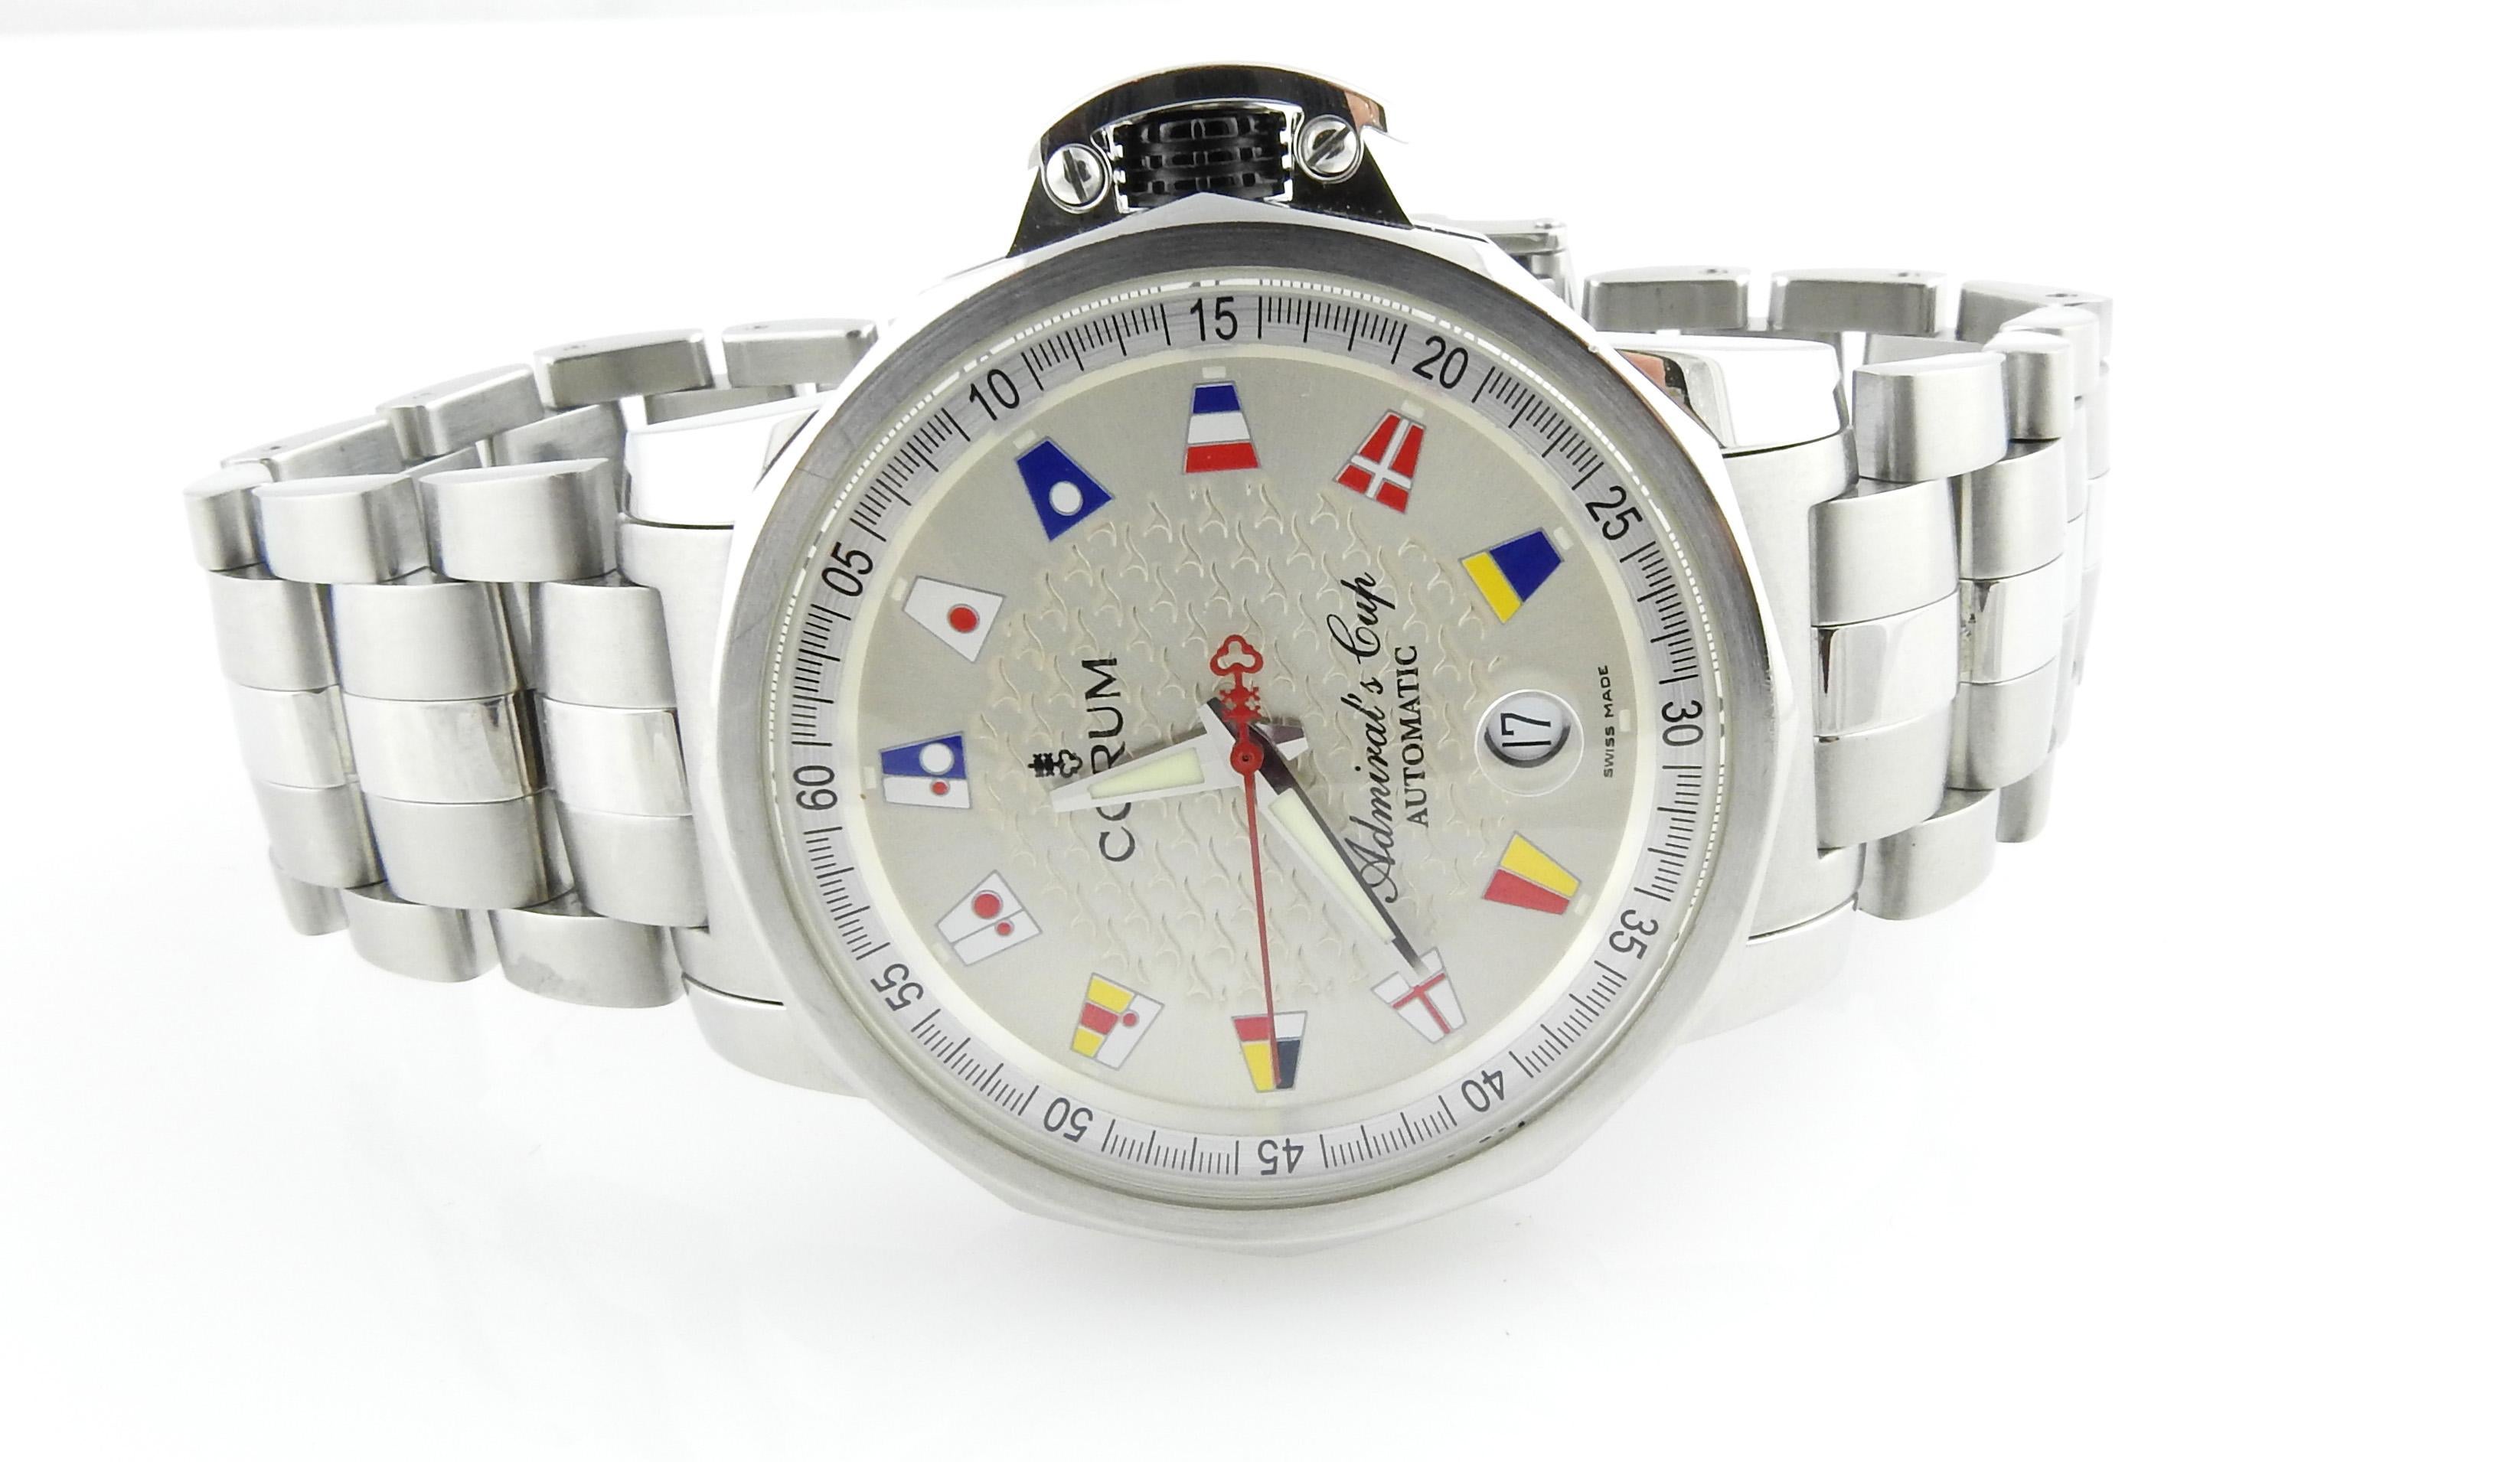 Corum Admiral's Cup Trophy 41 Men's Watch

This watch was purchased in 2006 and comes with all original boxes, warranty card and booklet.

Stainless Steel Case and bracelet - fits up to 8